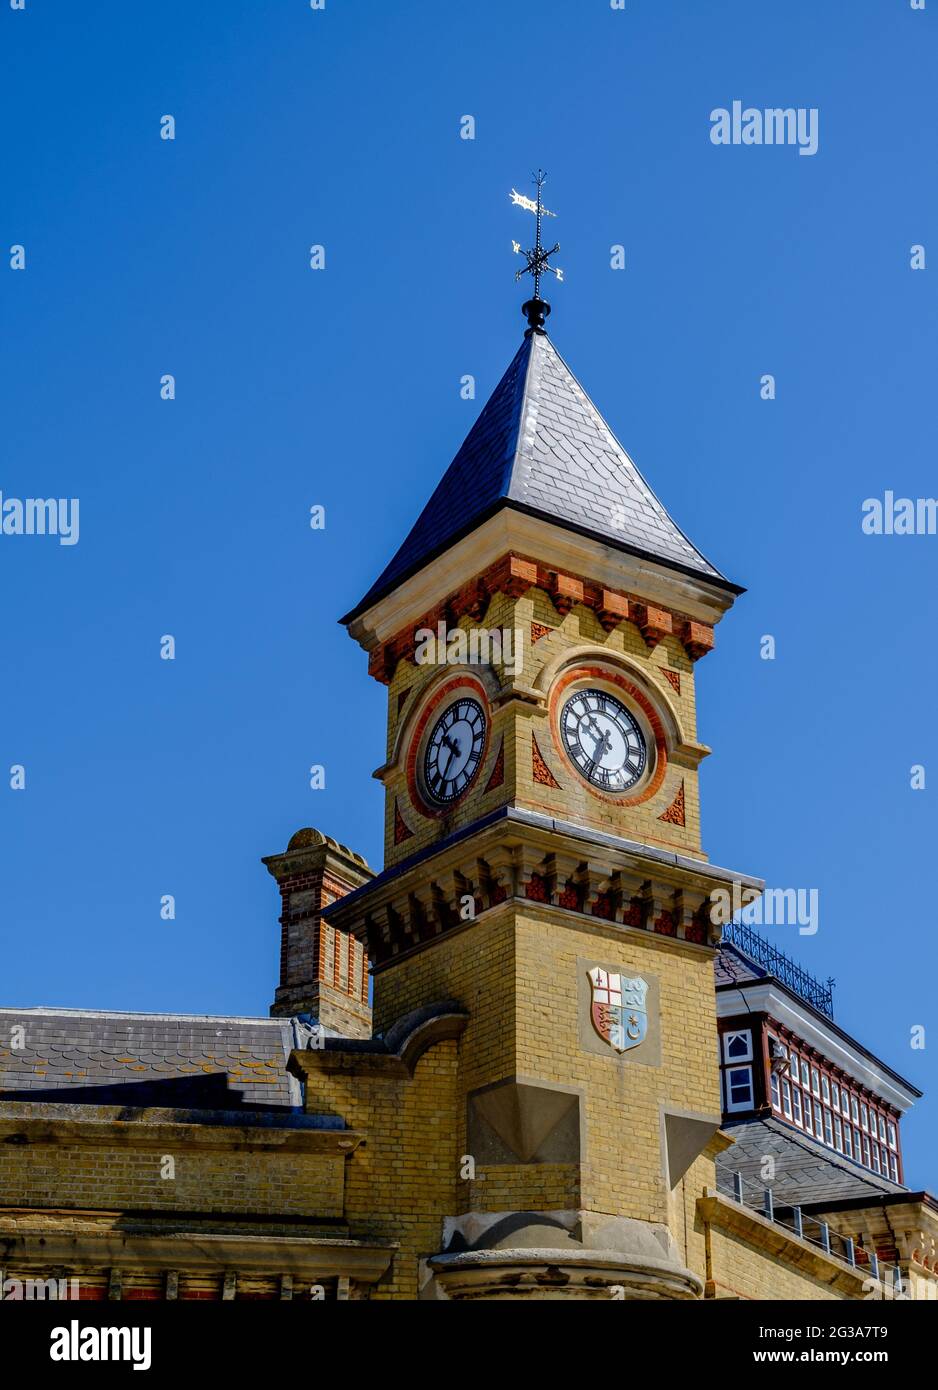 Staycation idea. Eastbourne Railway station clock tower, with coat of arms, against a cloudless blue sky. East Sussex, UK Stock Photo